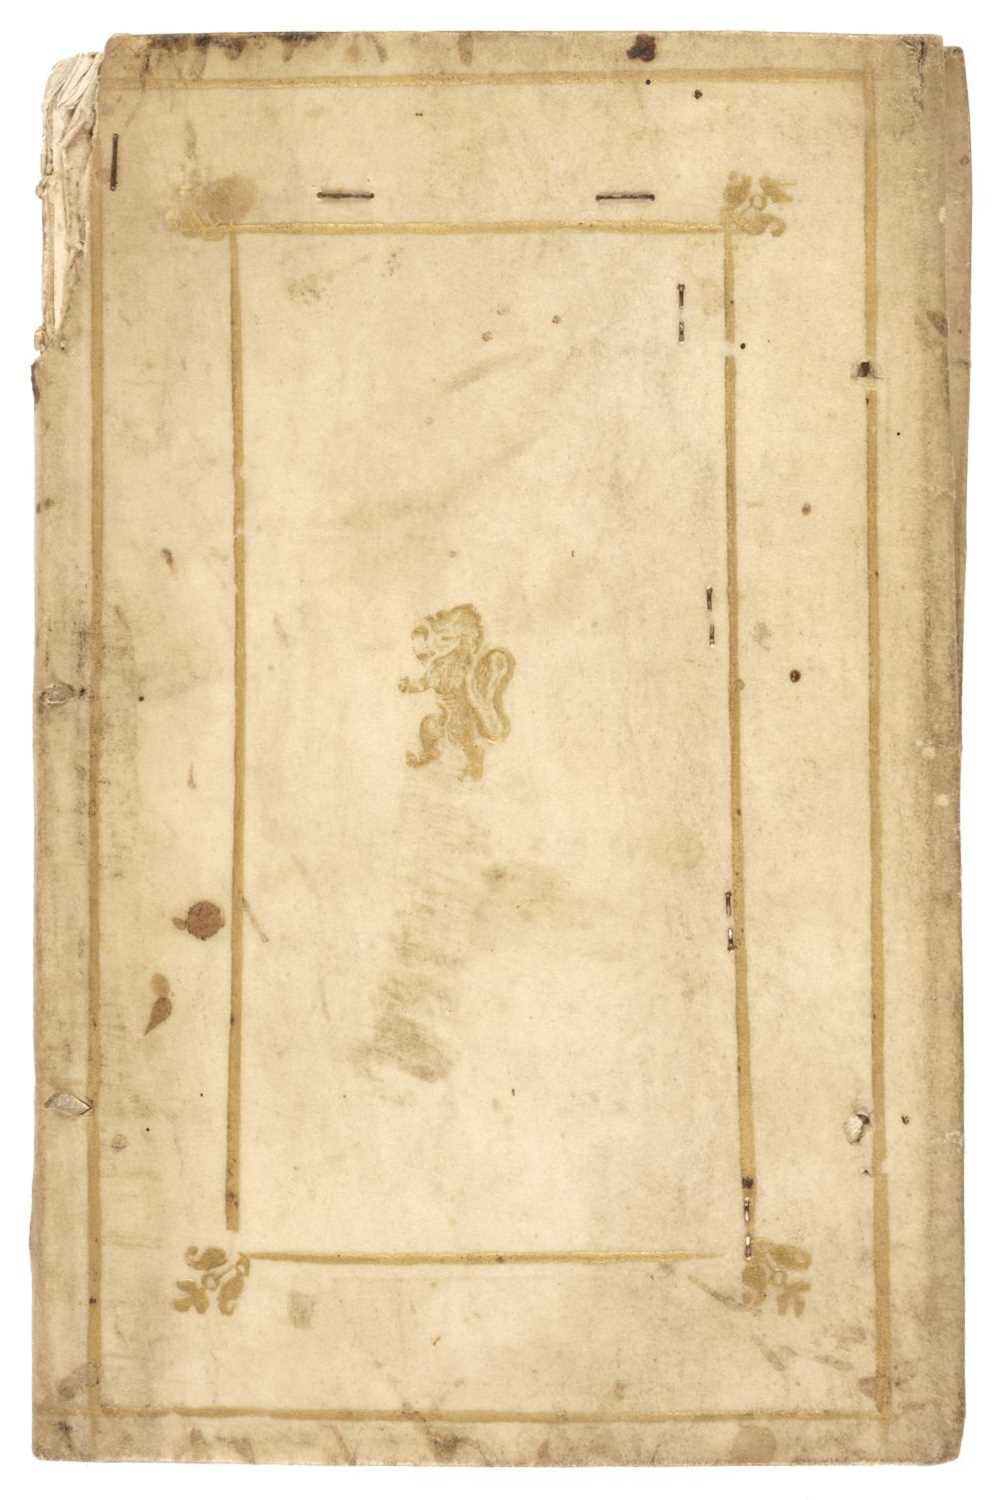 Lot 165 - Cheese Manuscript. A pamflyt compiled of Cheese, [?Warwickshire, England], c. 1580